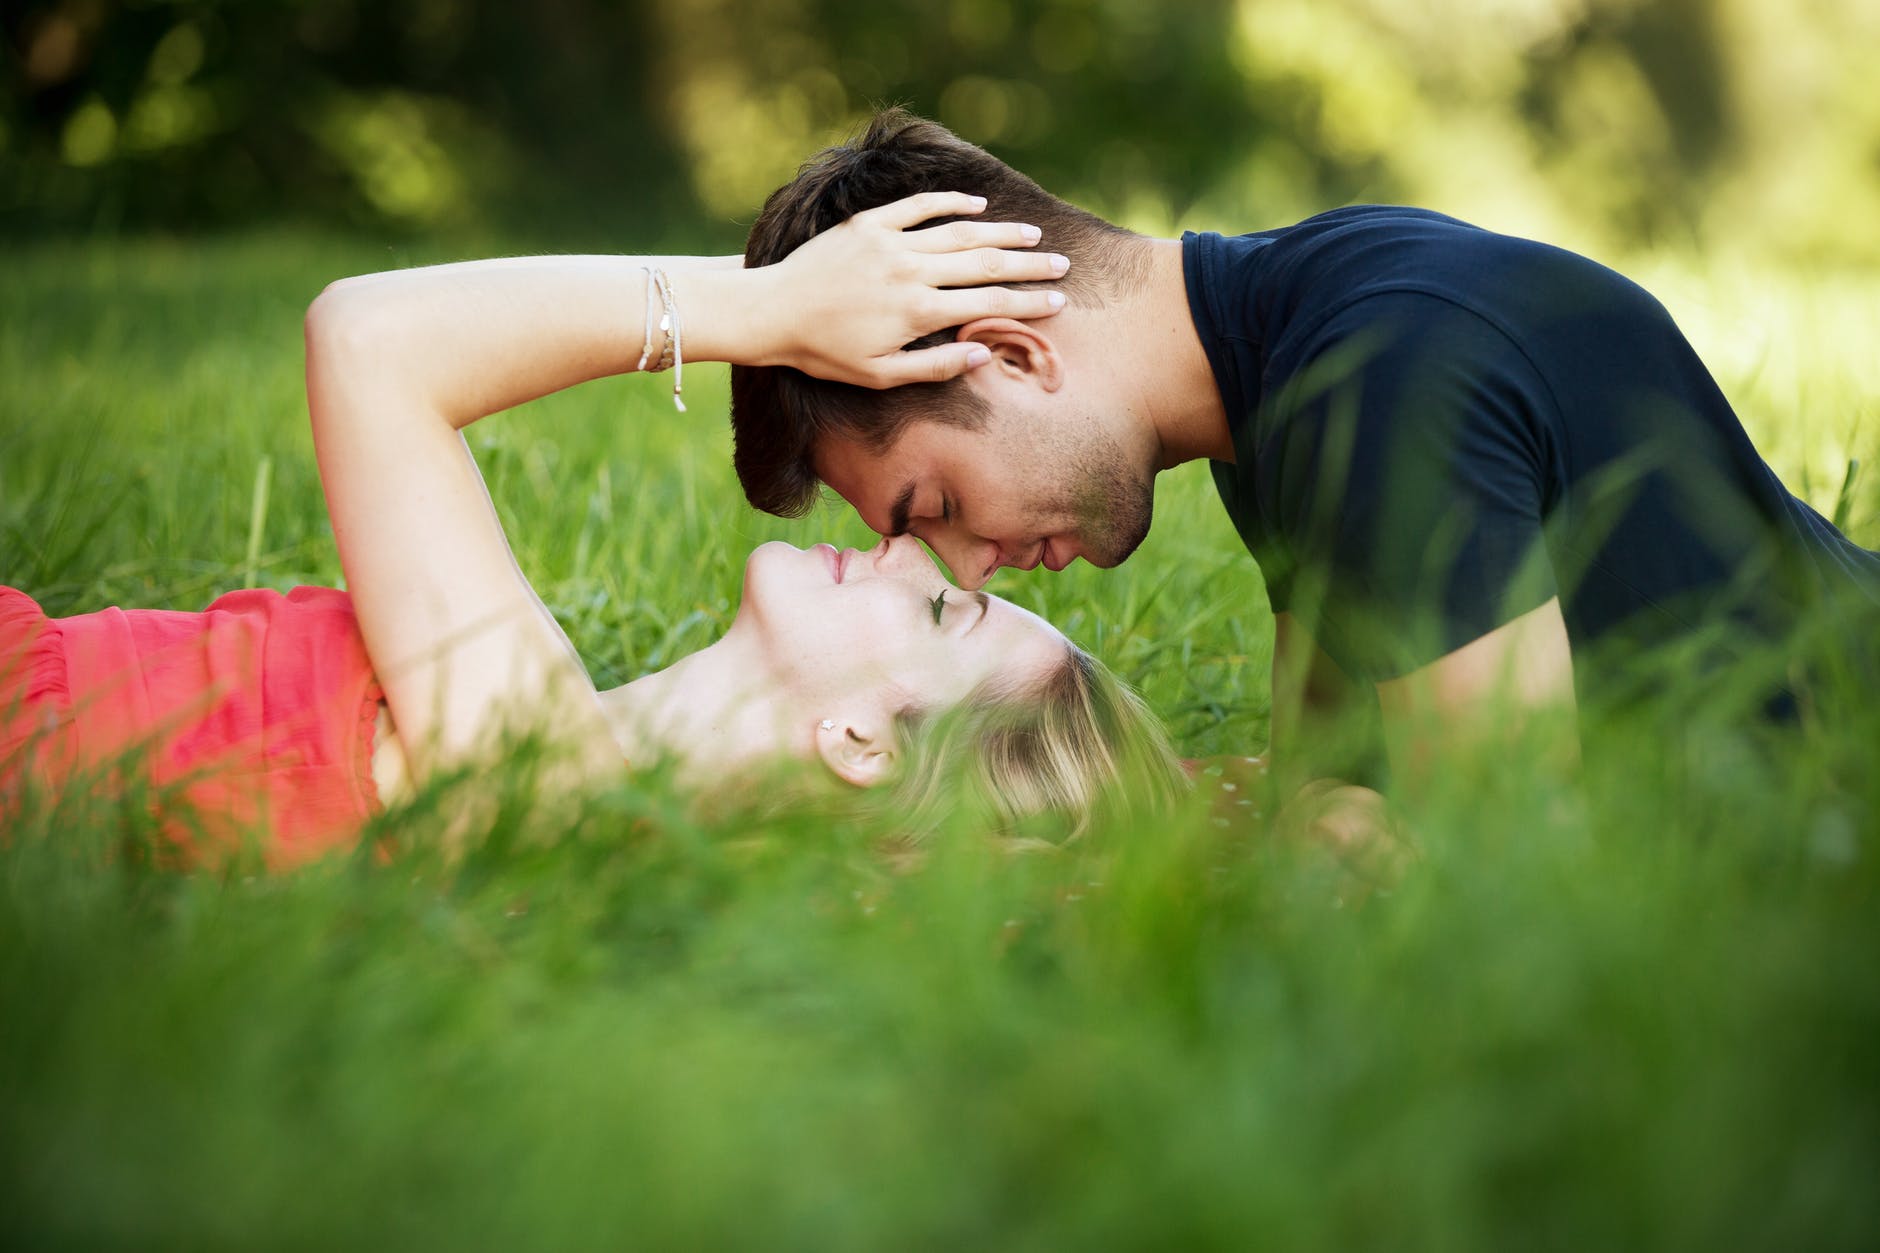 5 Ways To Be The Most Perfect Girlfriend He’s Ever Had